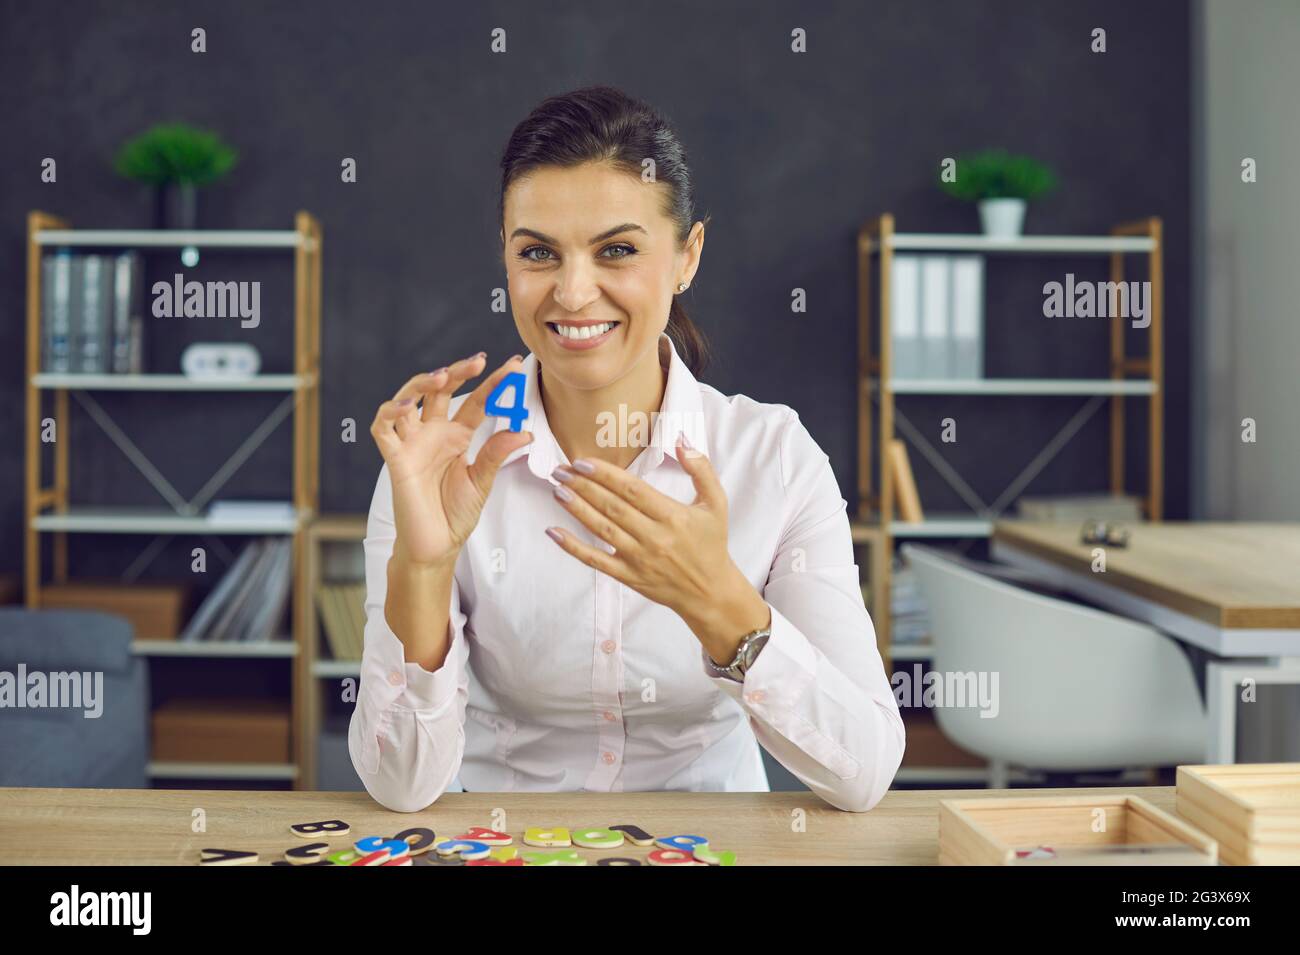 Young smiling woman shows the number 4. A young woman in a white blouse of European appearance Stock Photo